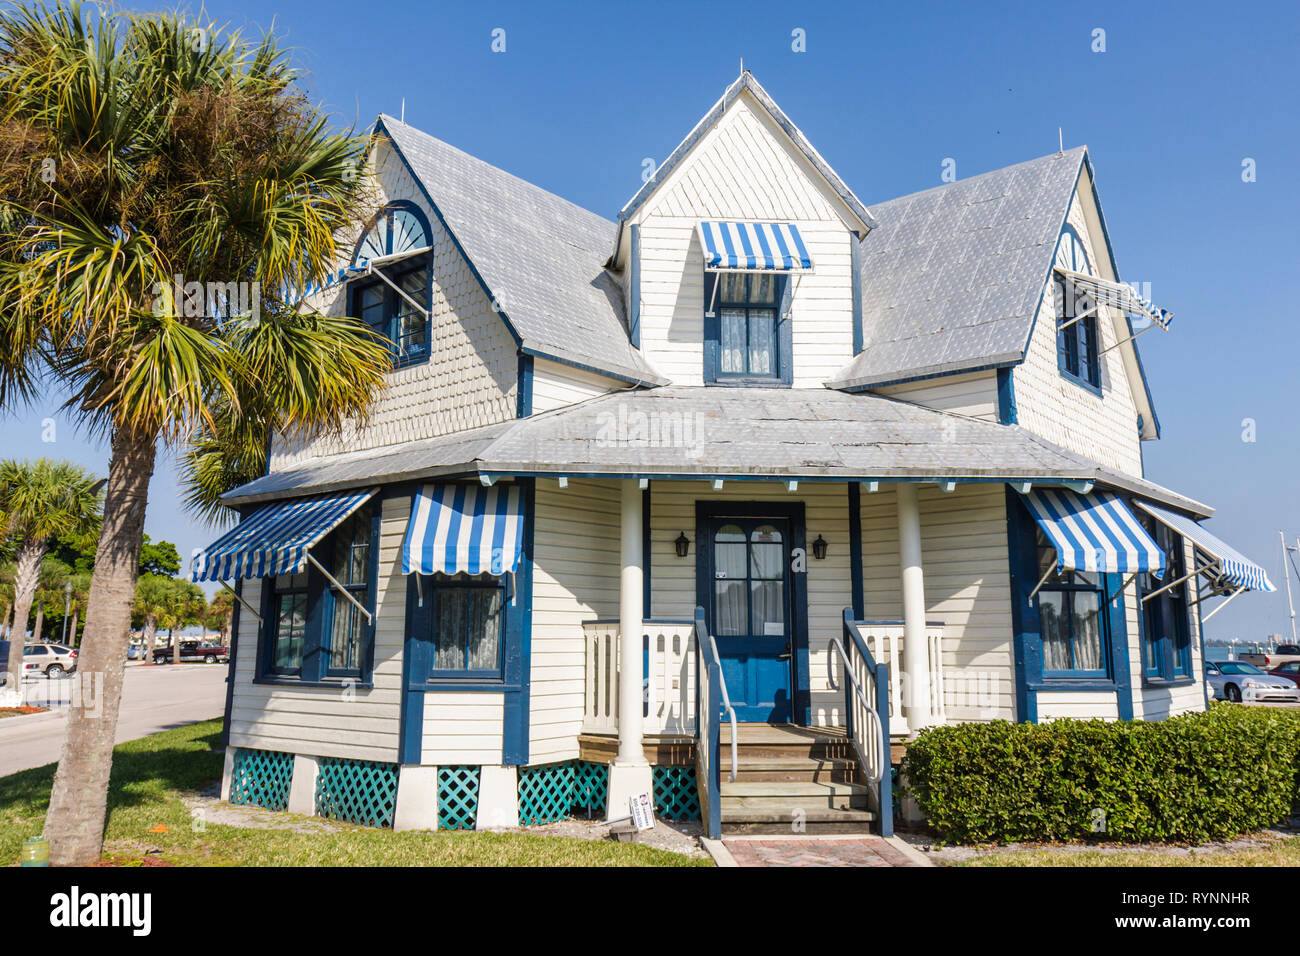 Florida Saint St. Lucie County,Fort Ft. Pierce,The Seven Gables house,houses,visitor information center & museum,historic downtown,windows,awnings,por Stock Photo